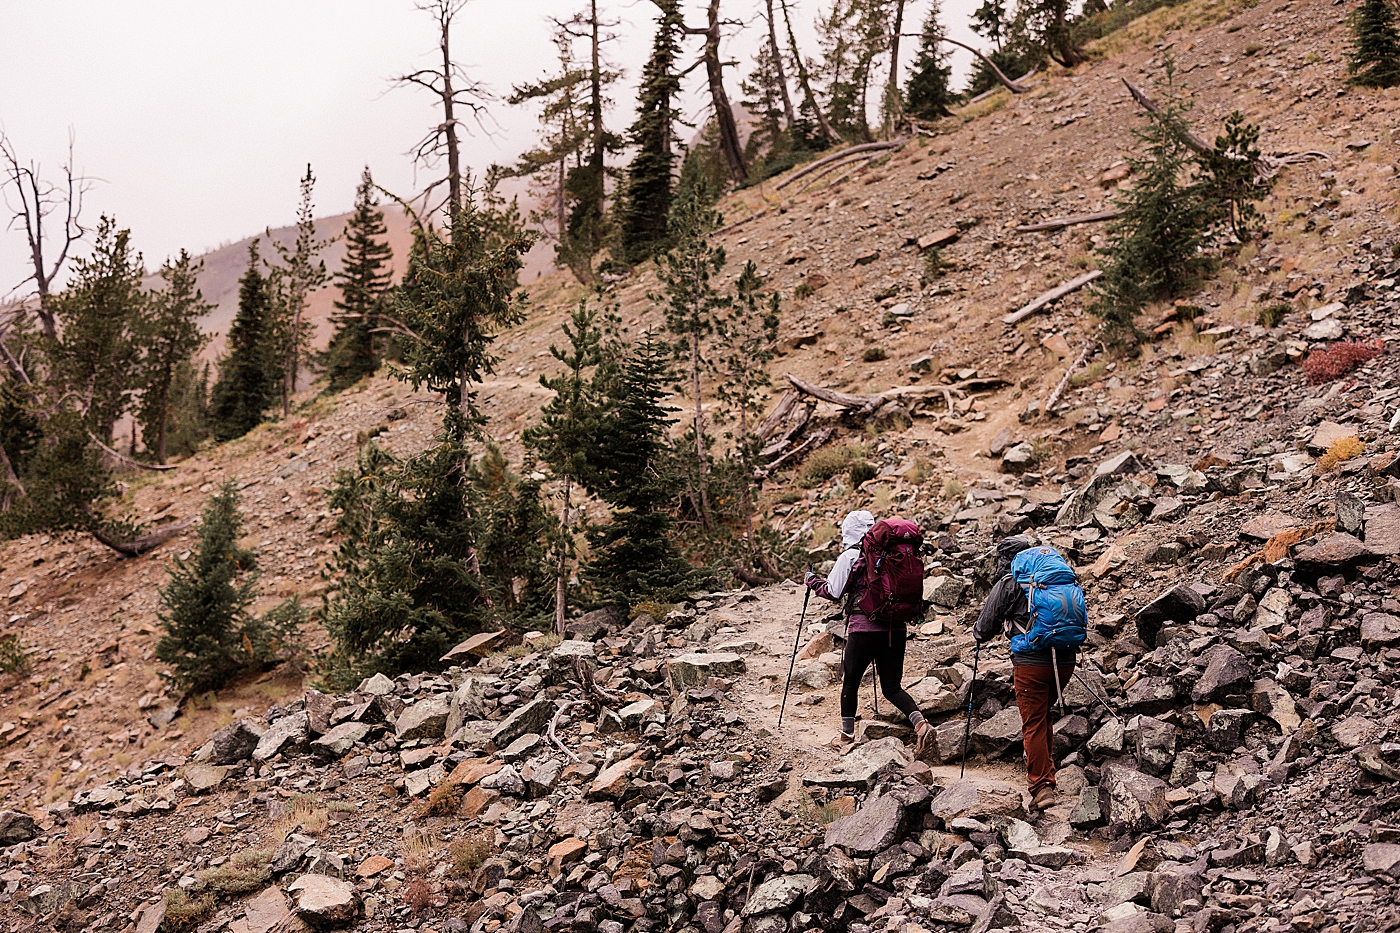 Hiking engagement session in Leavenworth. Photo by Megan Montalvo Photography.